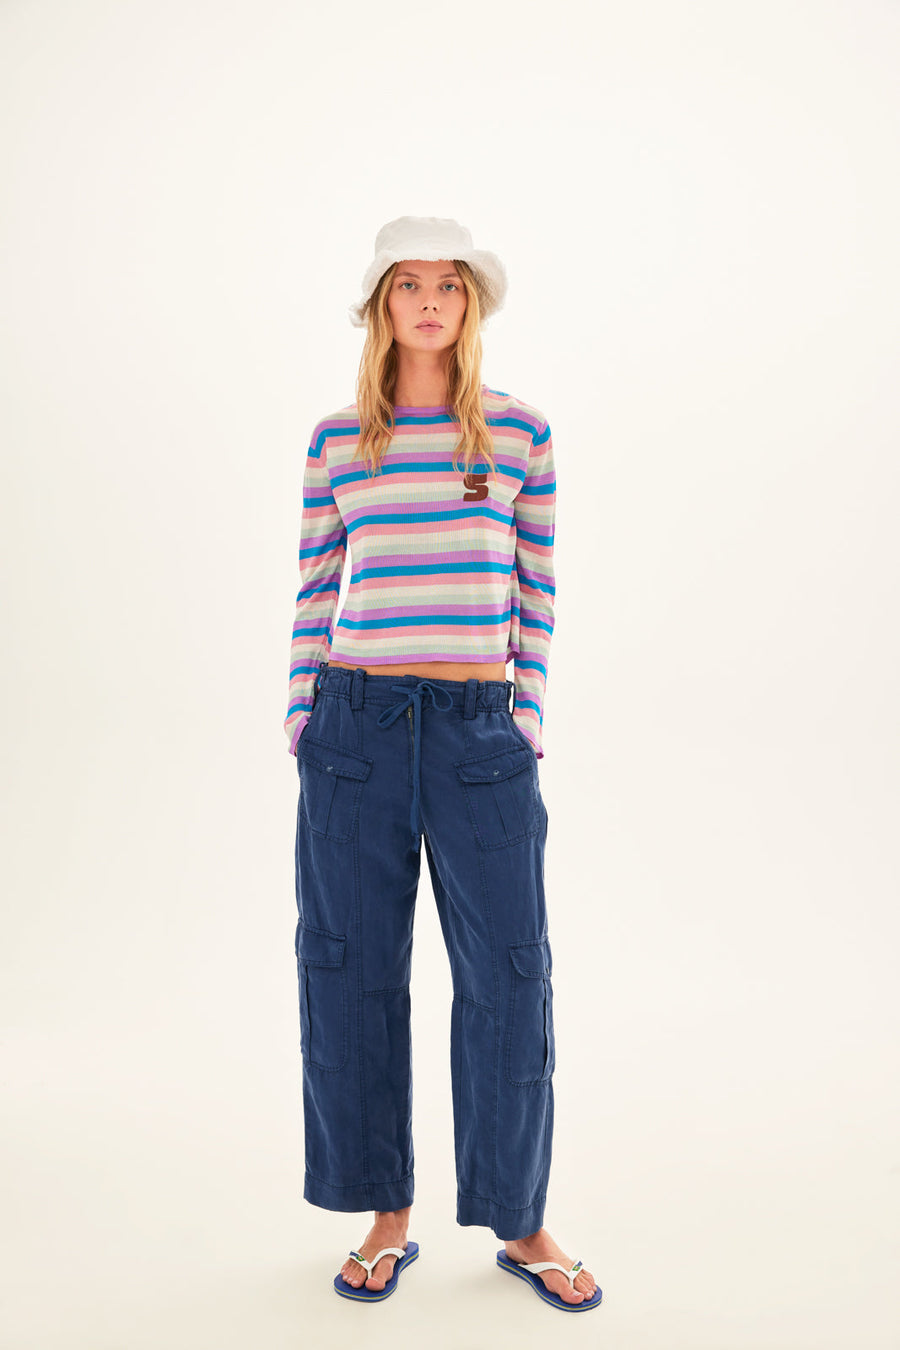 TEX - Pinky striped long sleeve knit top